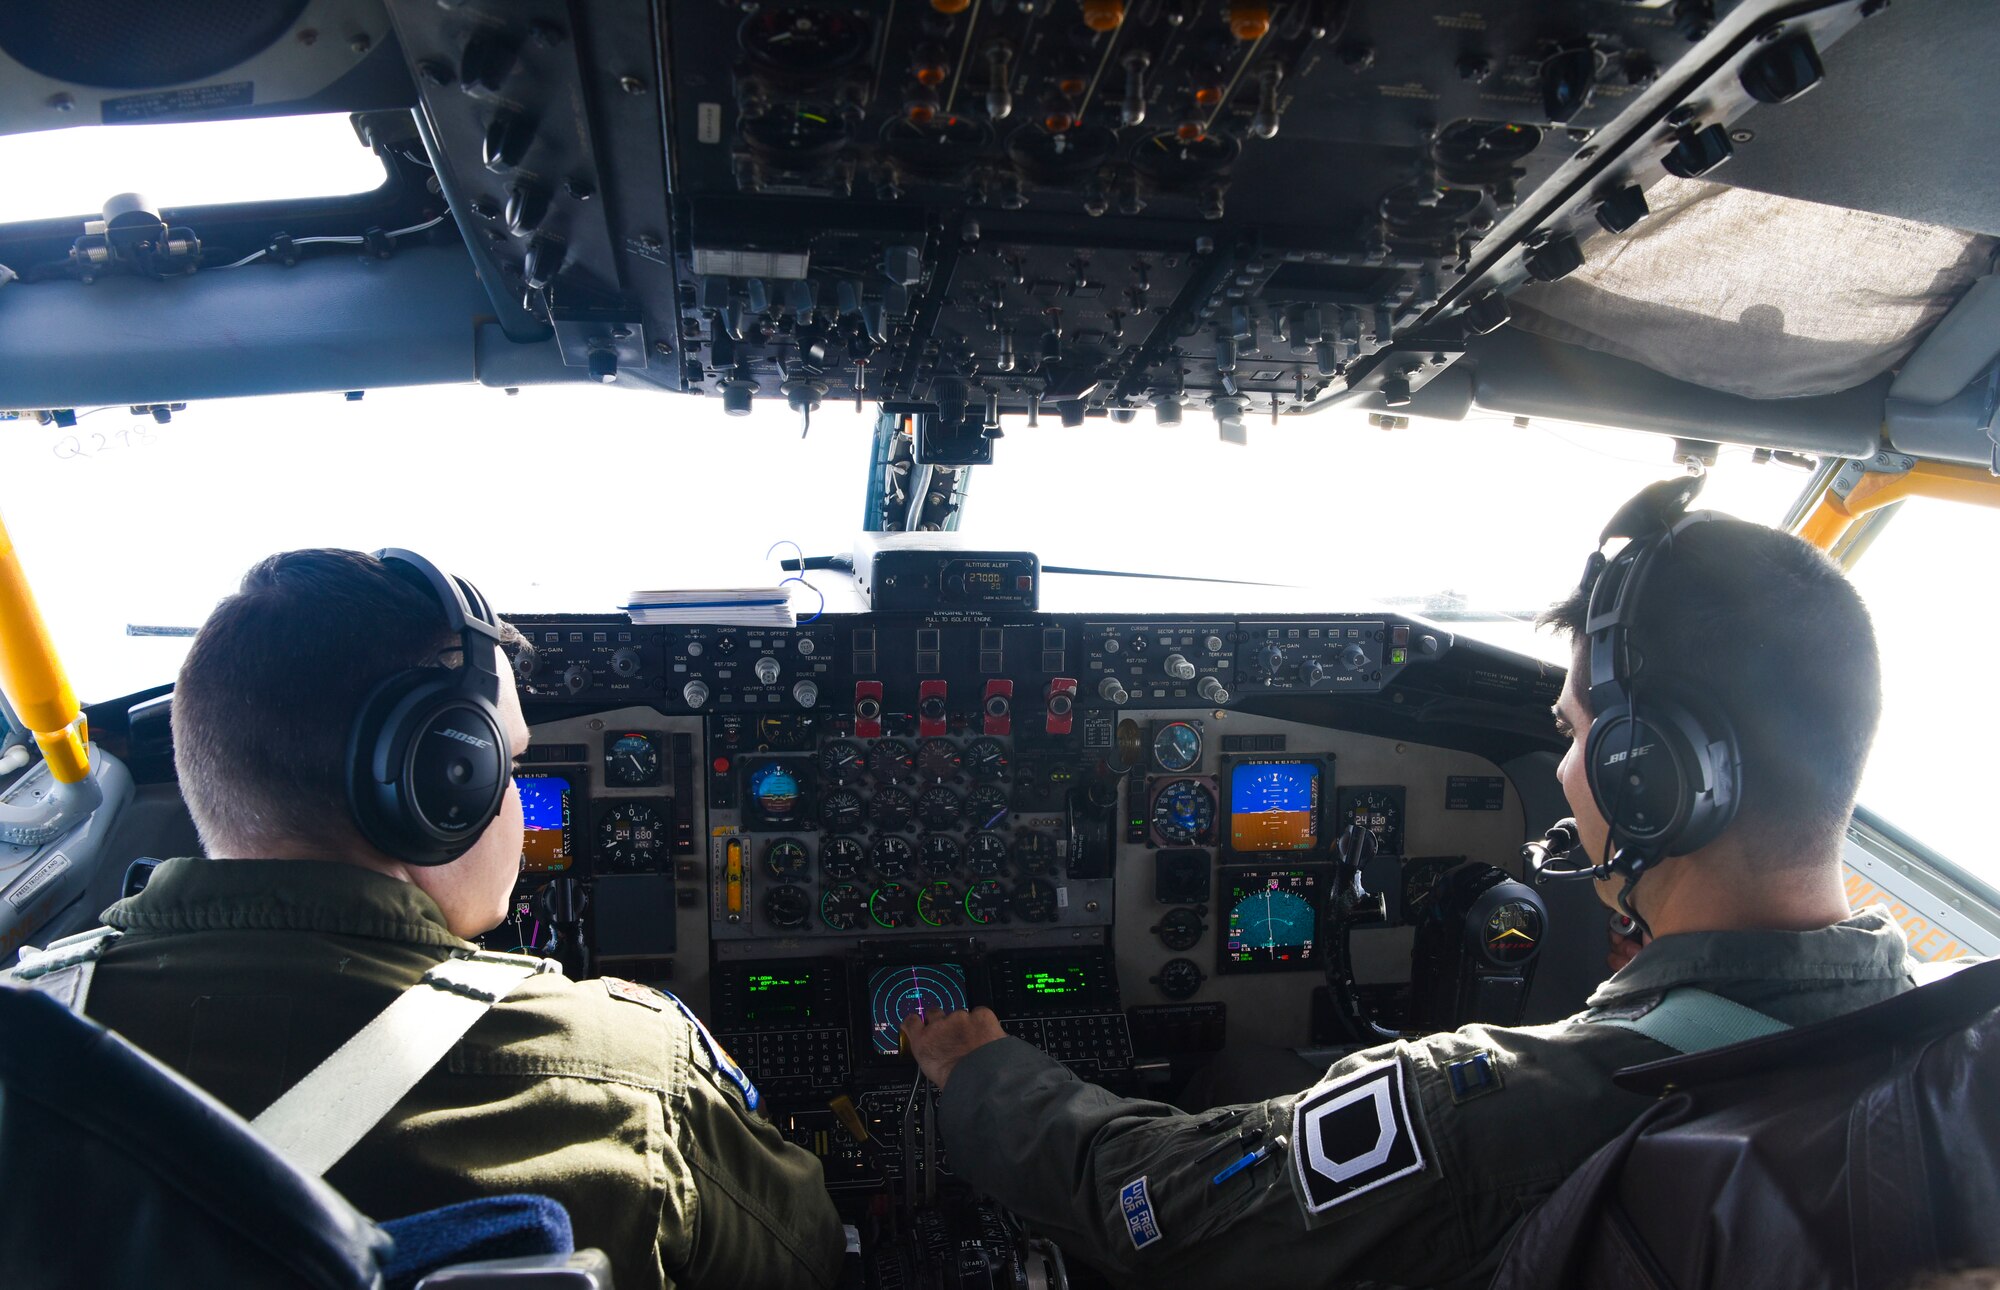 U.S. Air Force Maj. Guennadi Antonov, 351st Air Refueling Squadron pilot, and Capt. Paul Anguita, 351st ARS pilot, fly a KC-135 Stratotanker aircraft from the 100th Air Refueling Wing, Royal Air Force Mildenhall, England, Feb. 24 2021. The KC-135 provides the core aerial refueling capability for the U.S. Air Force and has excelled in this role for more than 60 years. (U.S. Air Force Photo by Airman 1st Class David C Busby)